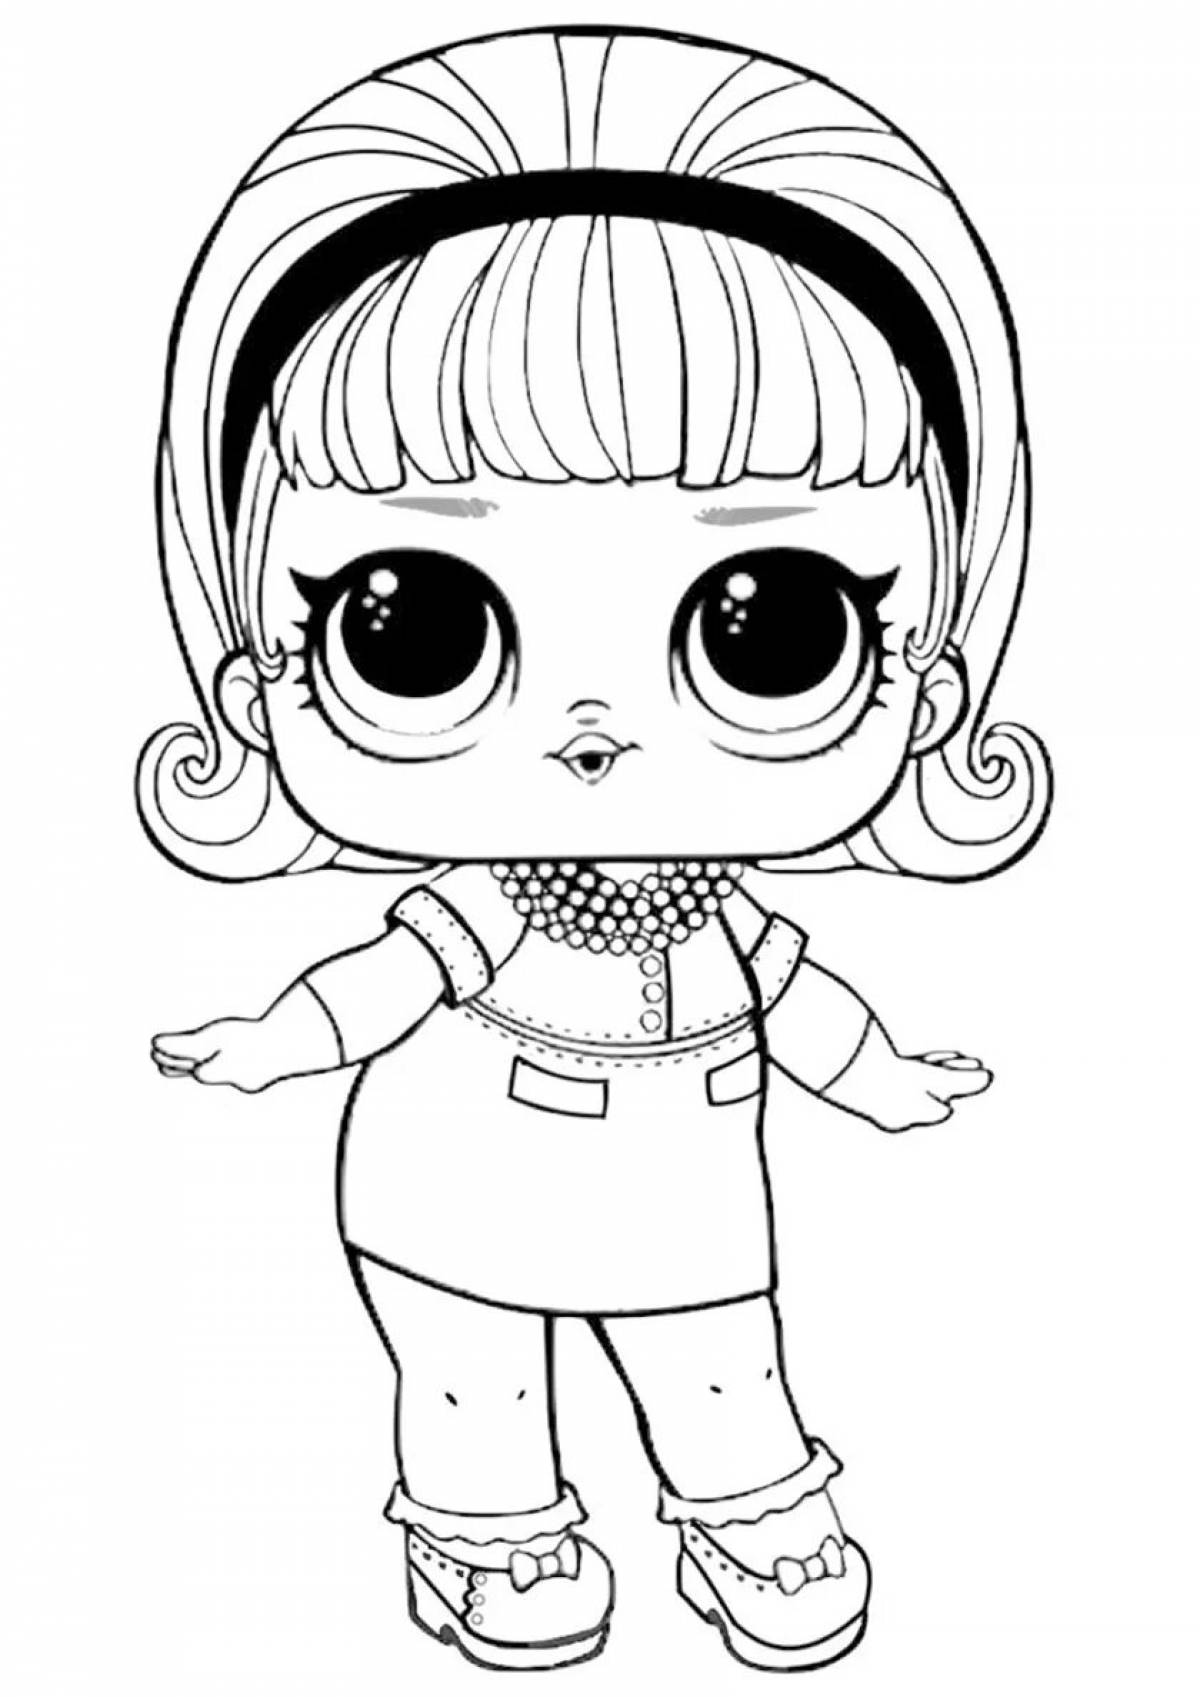 Cute loo coloring page